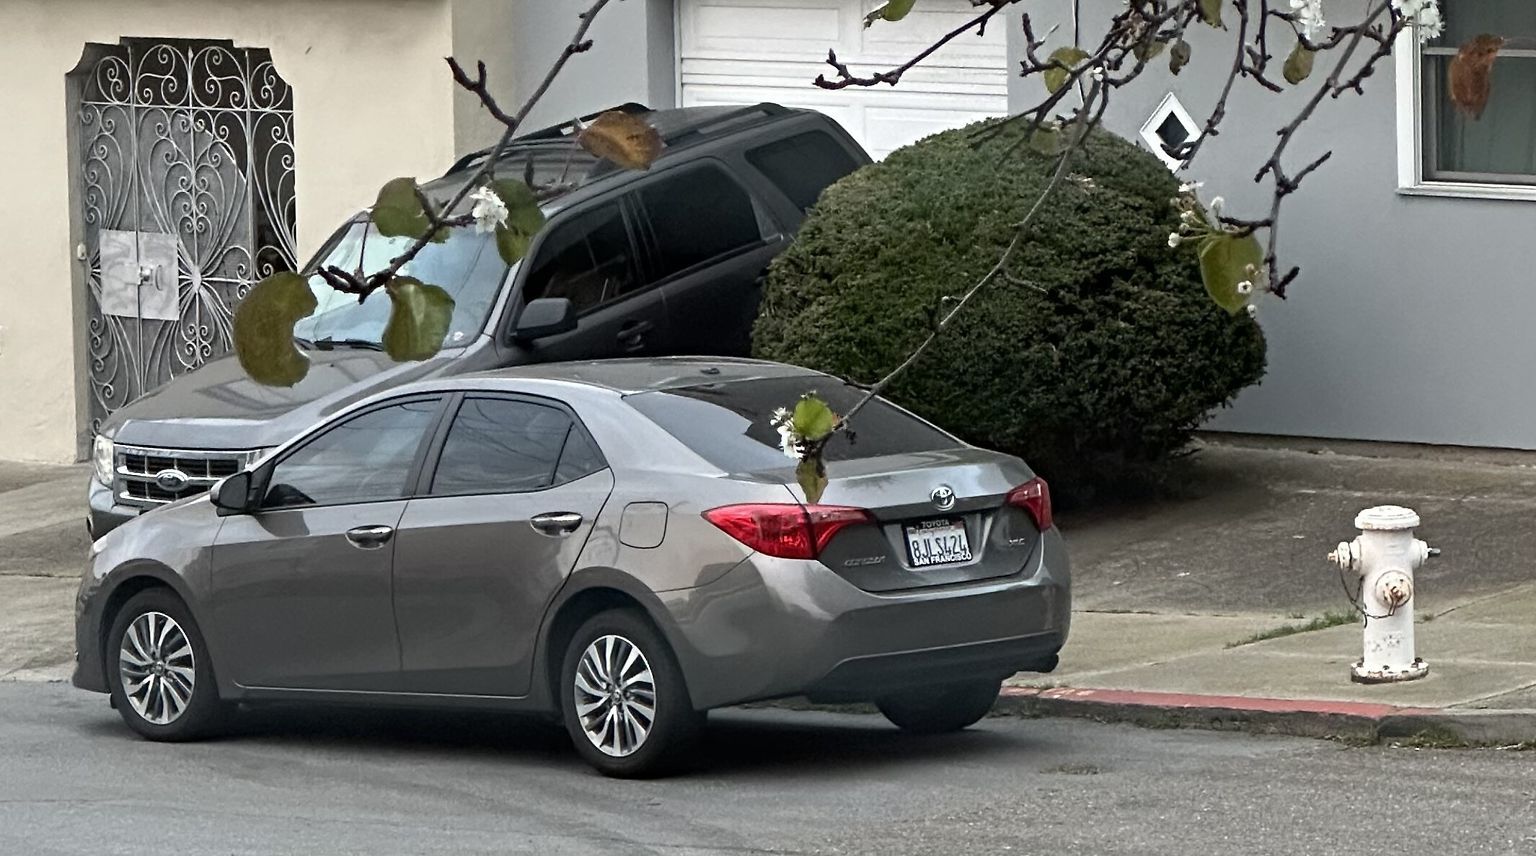 Photo of car in the street with license plate 8JLS424 in California